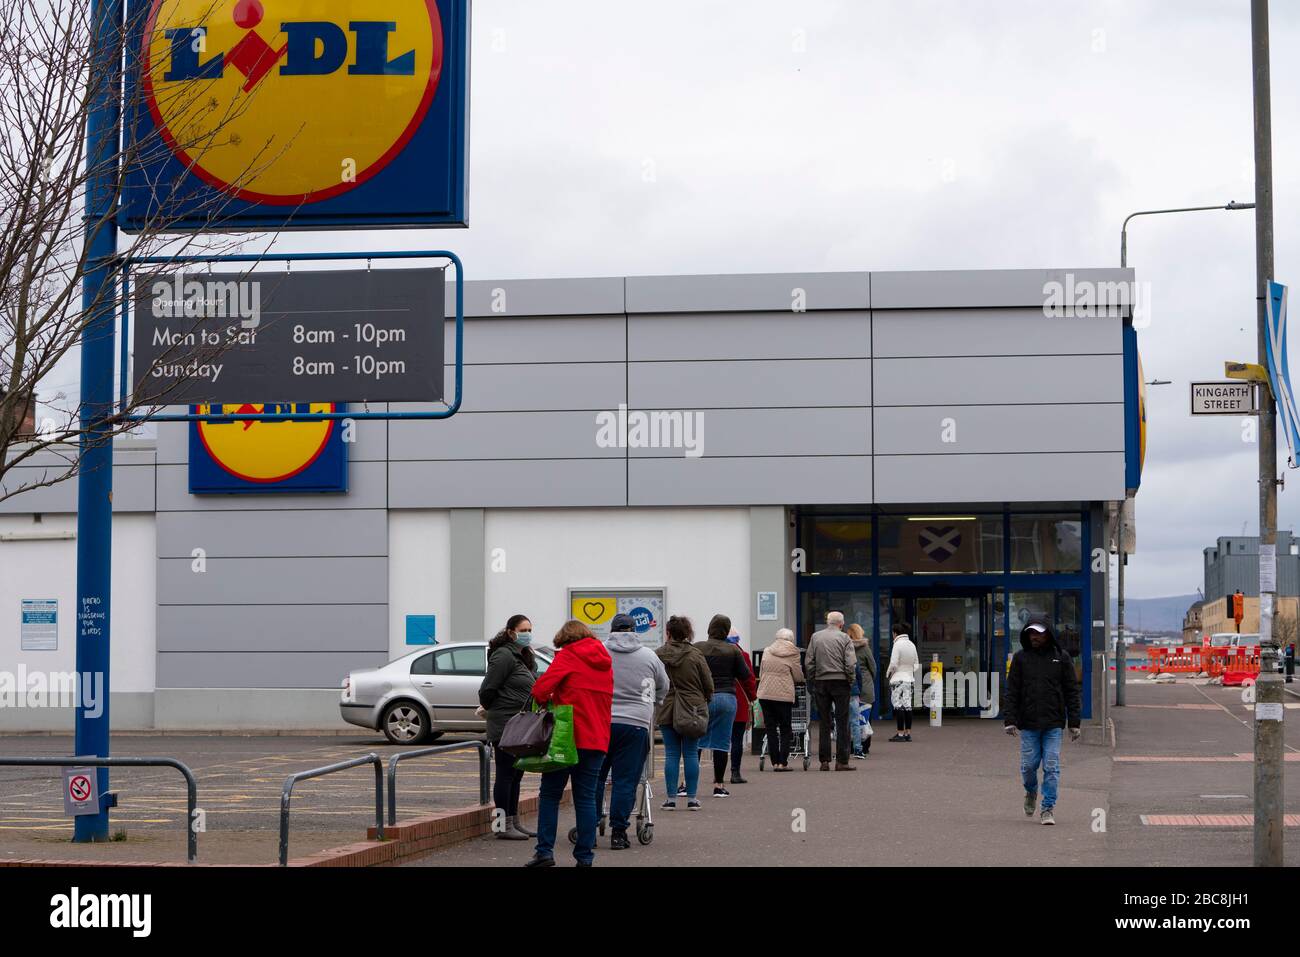 Glasgow, Scotland, UK. 3 April, 2020. Images from the south side of Glasgow at the end of the second week of Coronavirus lockdown. Long queue outside Lidl supermarket in Govanhill.  Iain Masterton/Alamy Live News Stock Photo